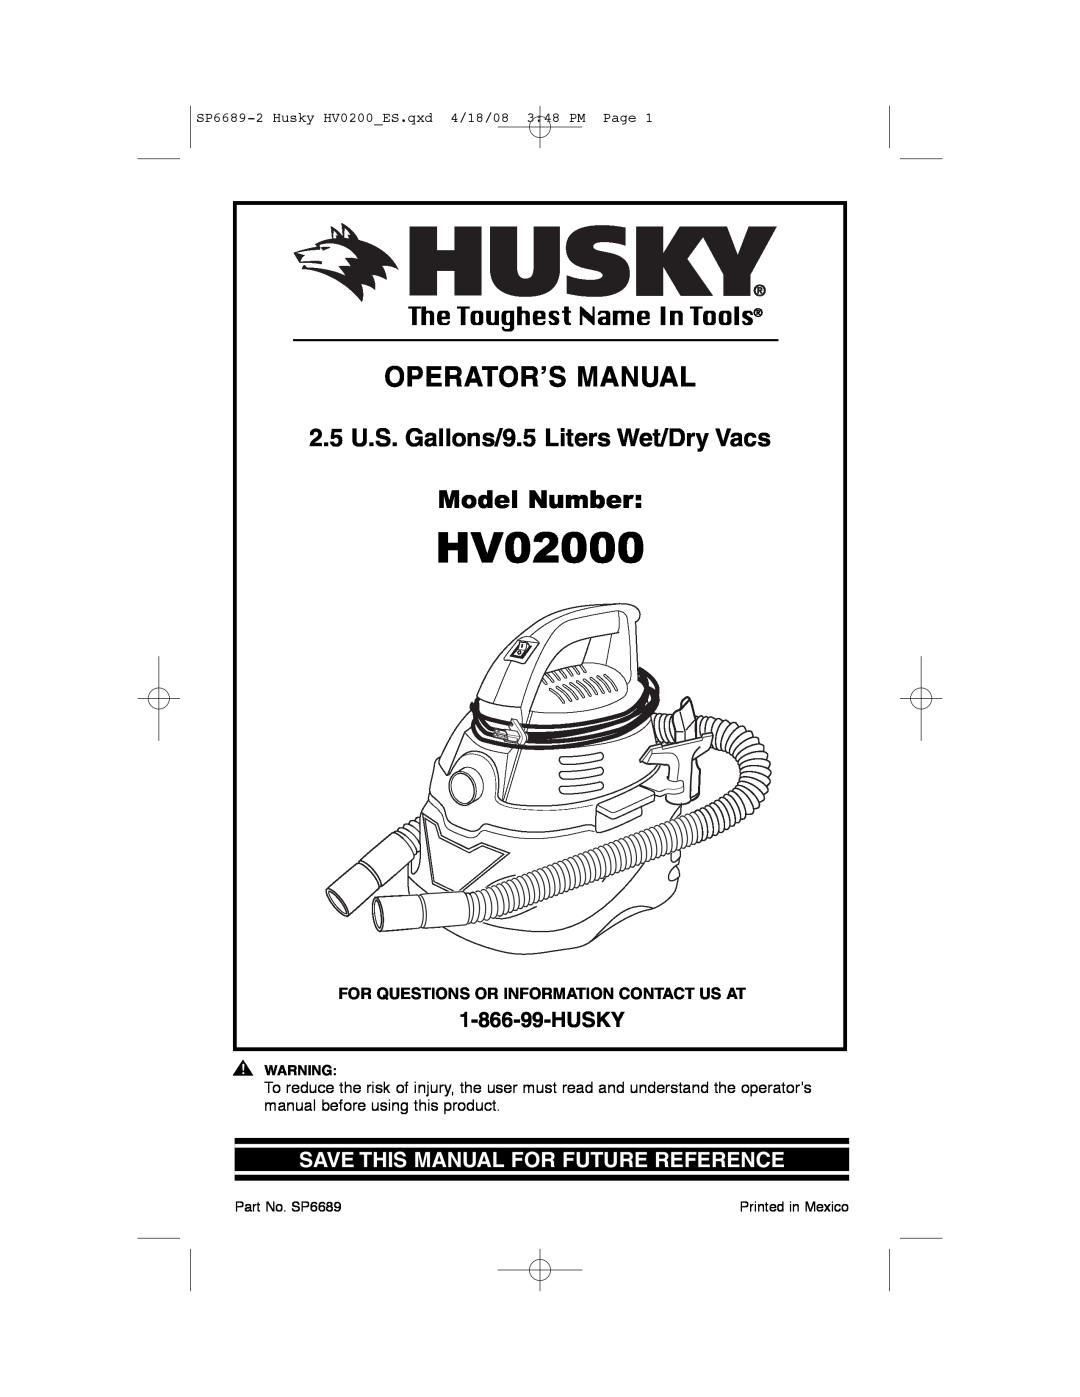 Husky HV02000 manual The Toughest Name In Tools, Model Number, Save This Manual For Future Reference, Husky 